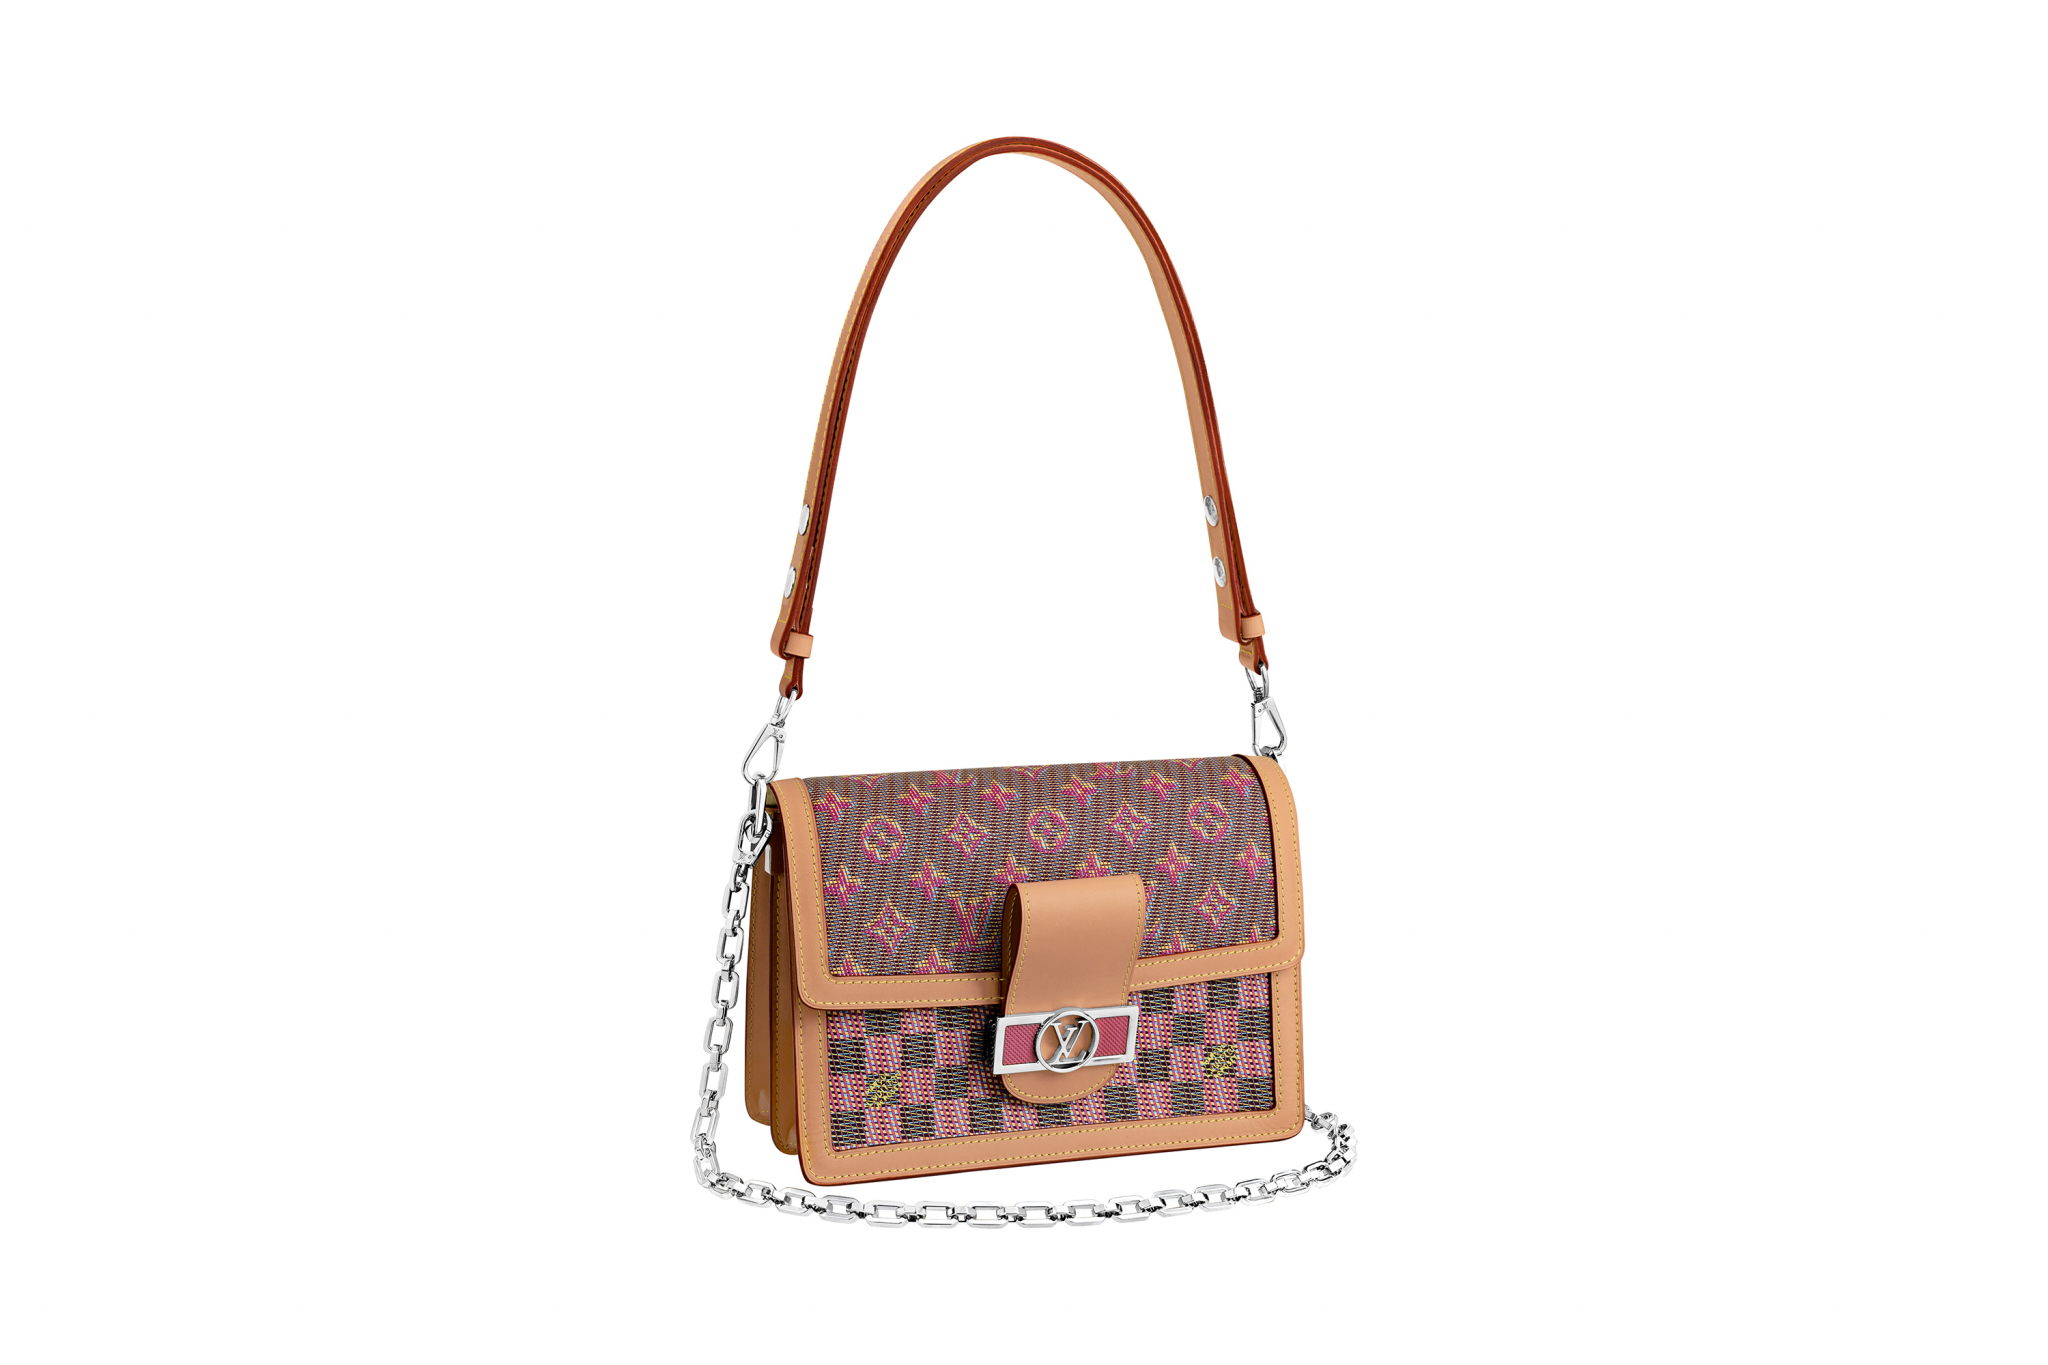 Louis Vuitton is coming to The Woodlands - literacybasics.ca